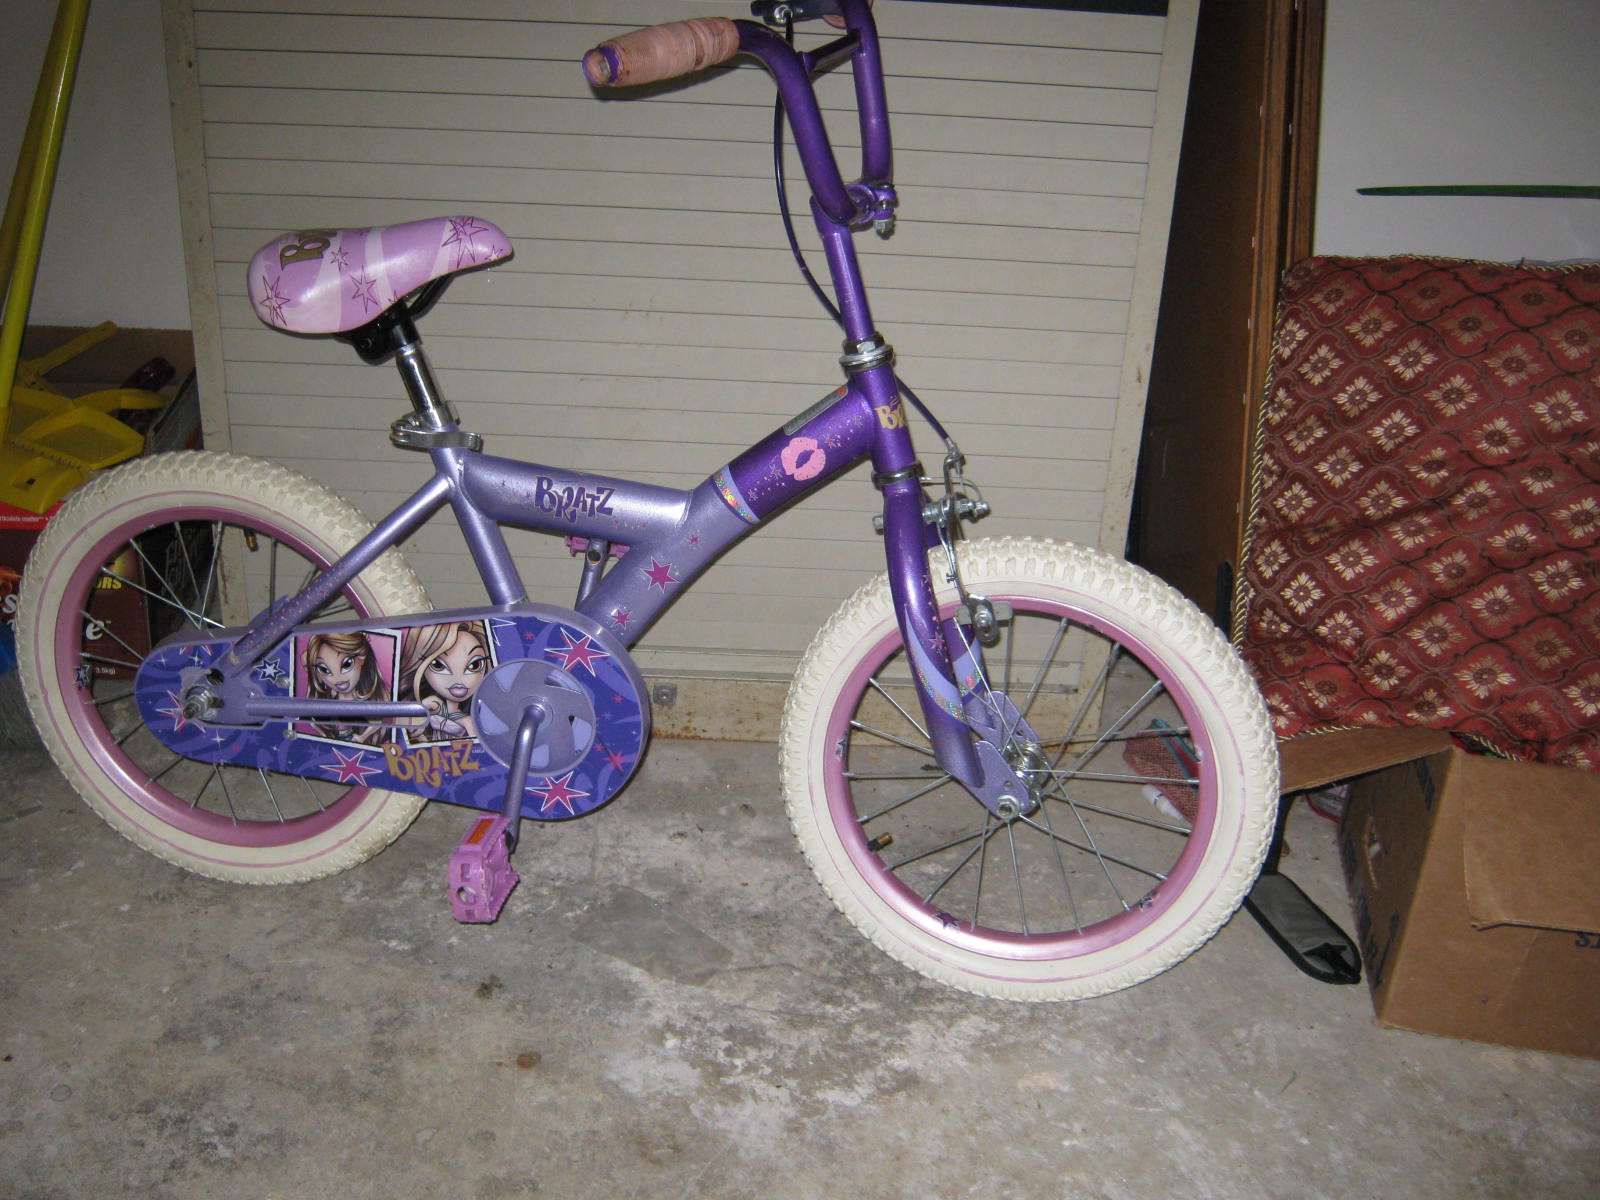 Just miss training wheels on this bicycle[ Br